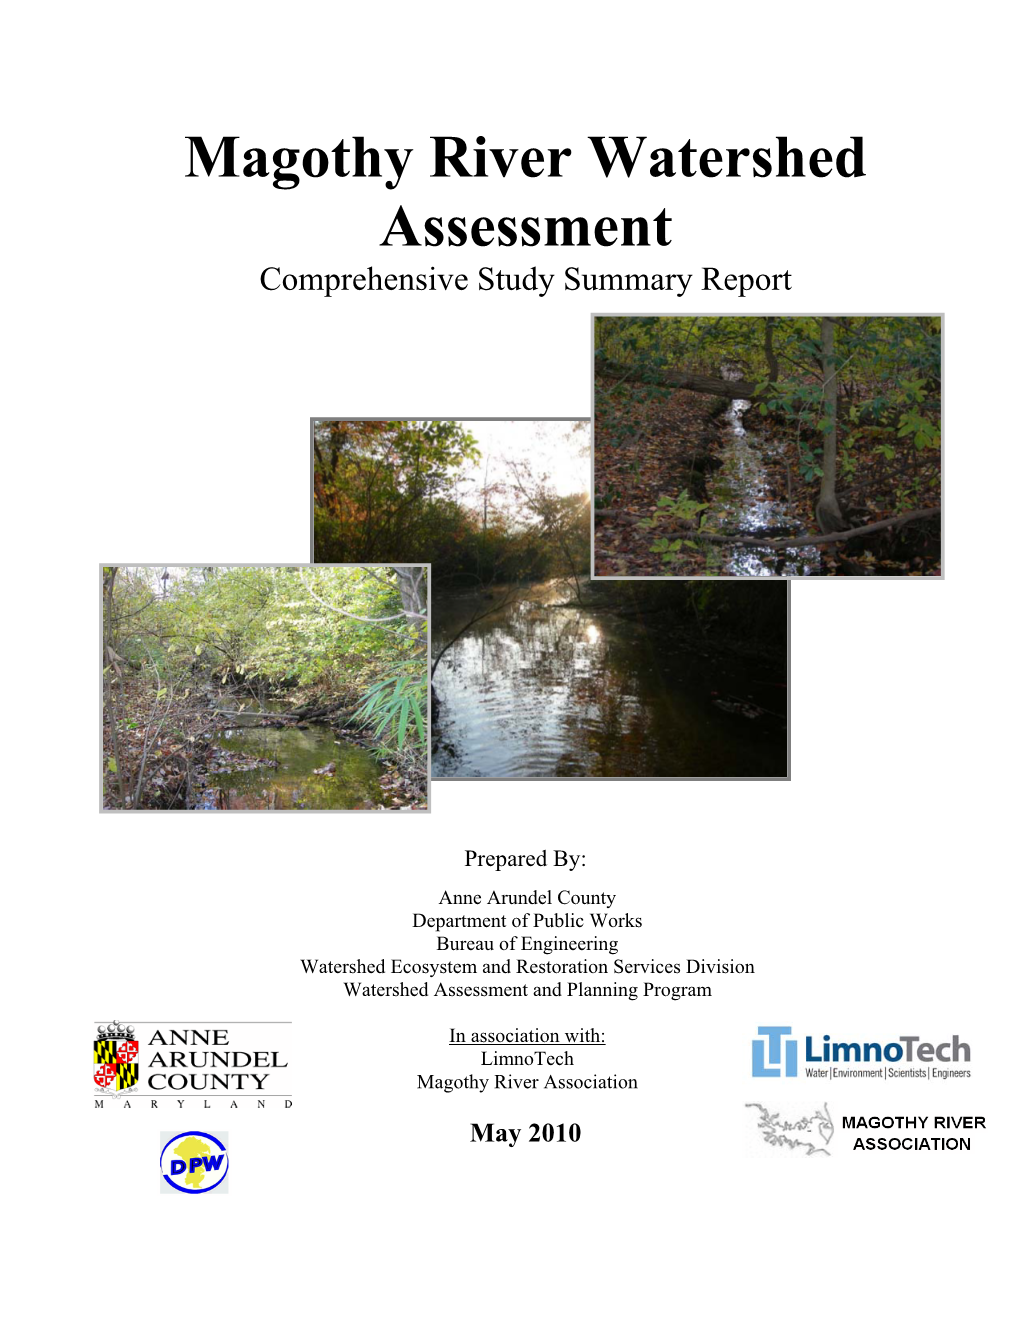 Magothy River Summary Report